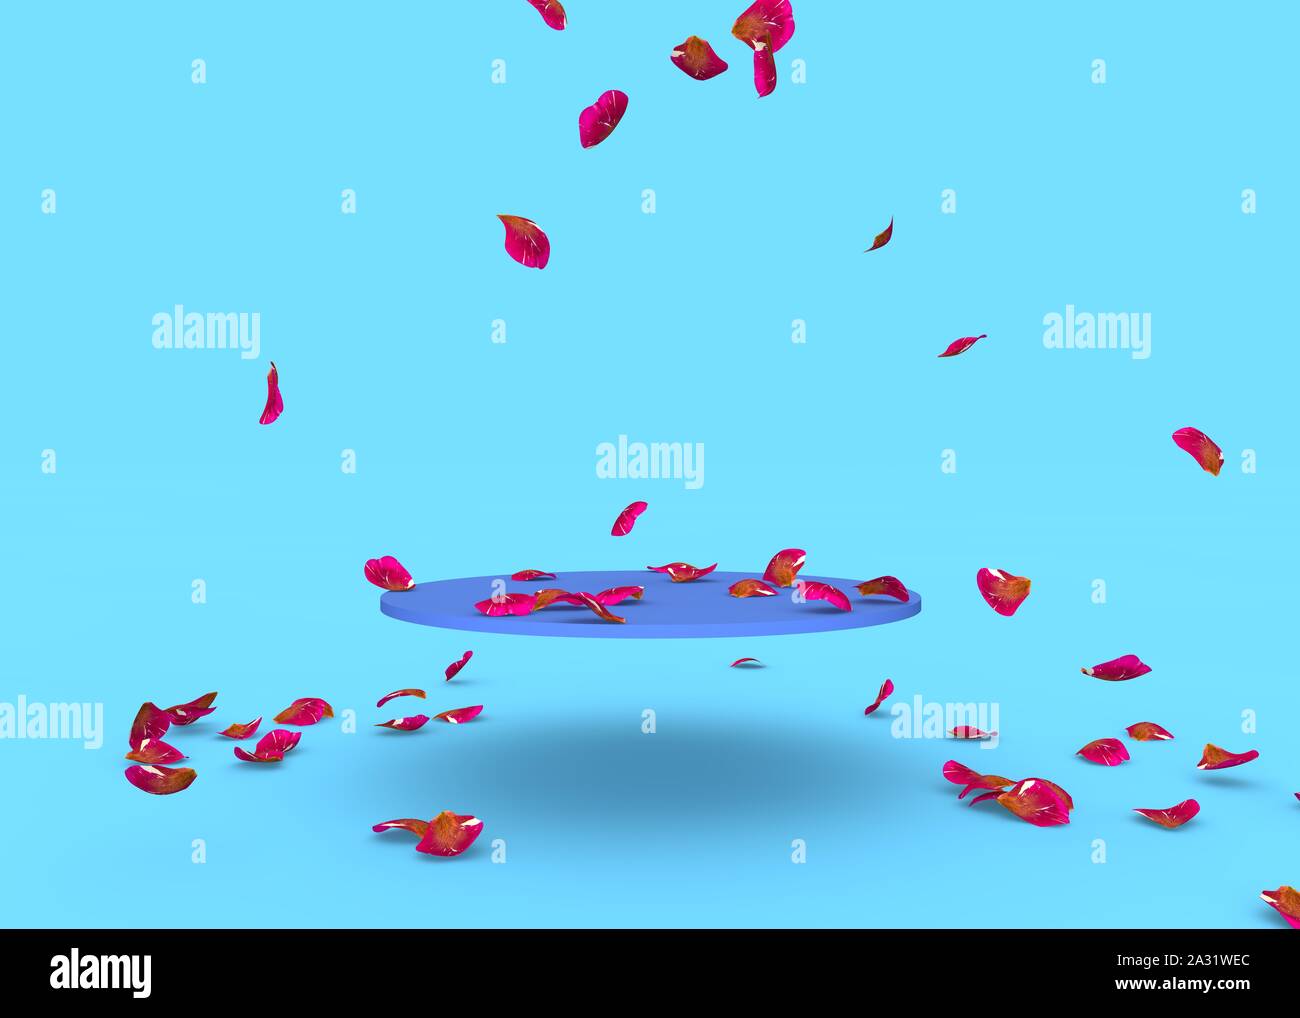 Red rose petals fall on the stand on a blue background. Free space on the stand for your design. 3D illustration Stock Photo